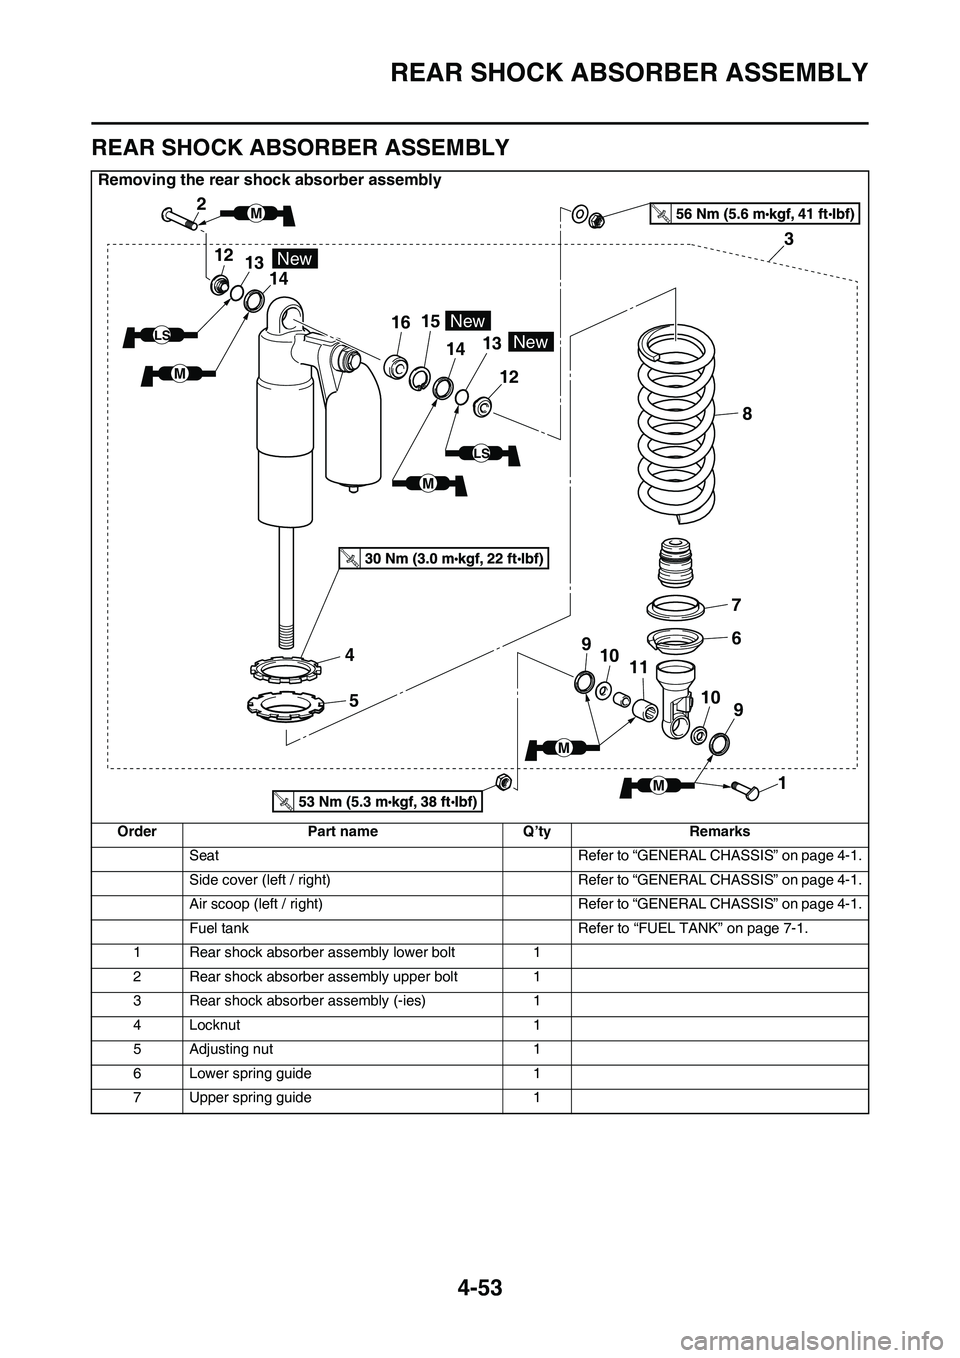 YAMAHA YZ450F 2014 Owners Guide REAR SHOCK ABSORBER ASSEMBLY
4-53
EAS1SL1175
REAR SHOCK ABSORBER ASSEMBLY
Removing the rear shock absorber assembly
OrderPart nameQ’tyRemarks
SeatRefer to “GENERAL CHASSIS” on page 4-1.
Side cov